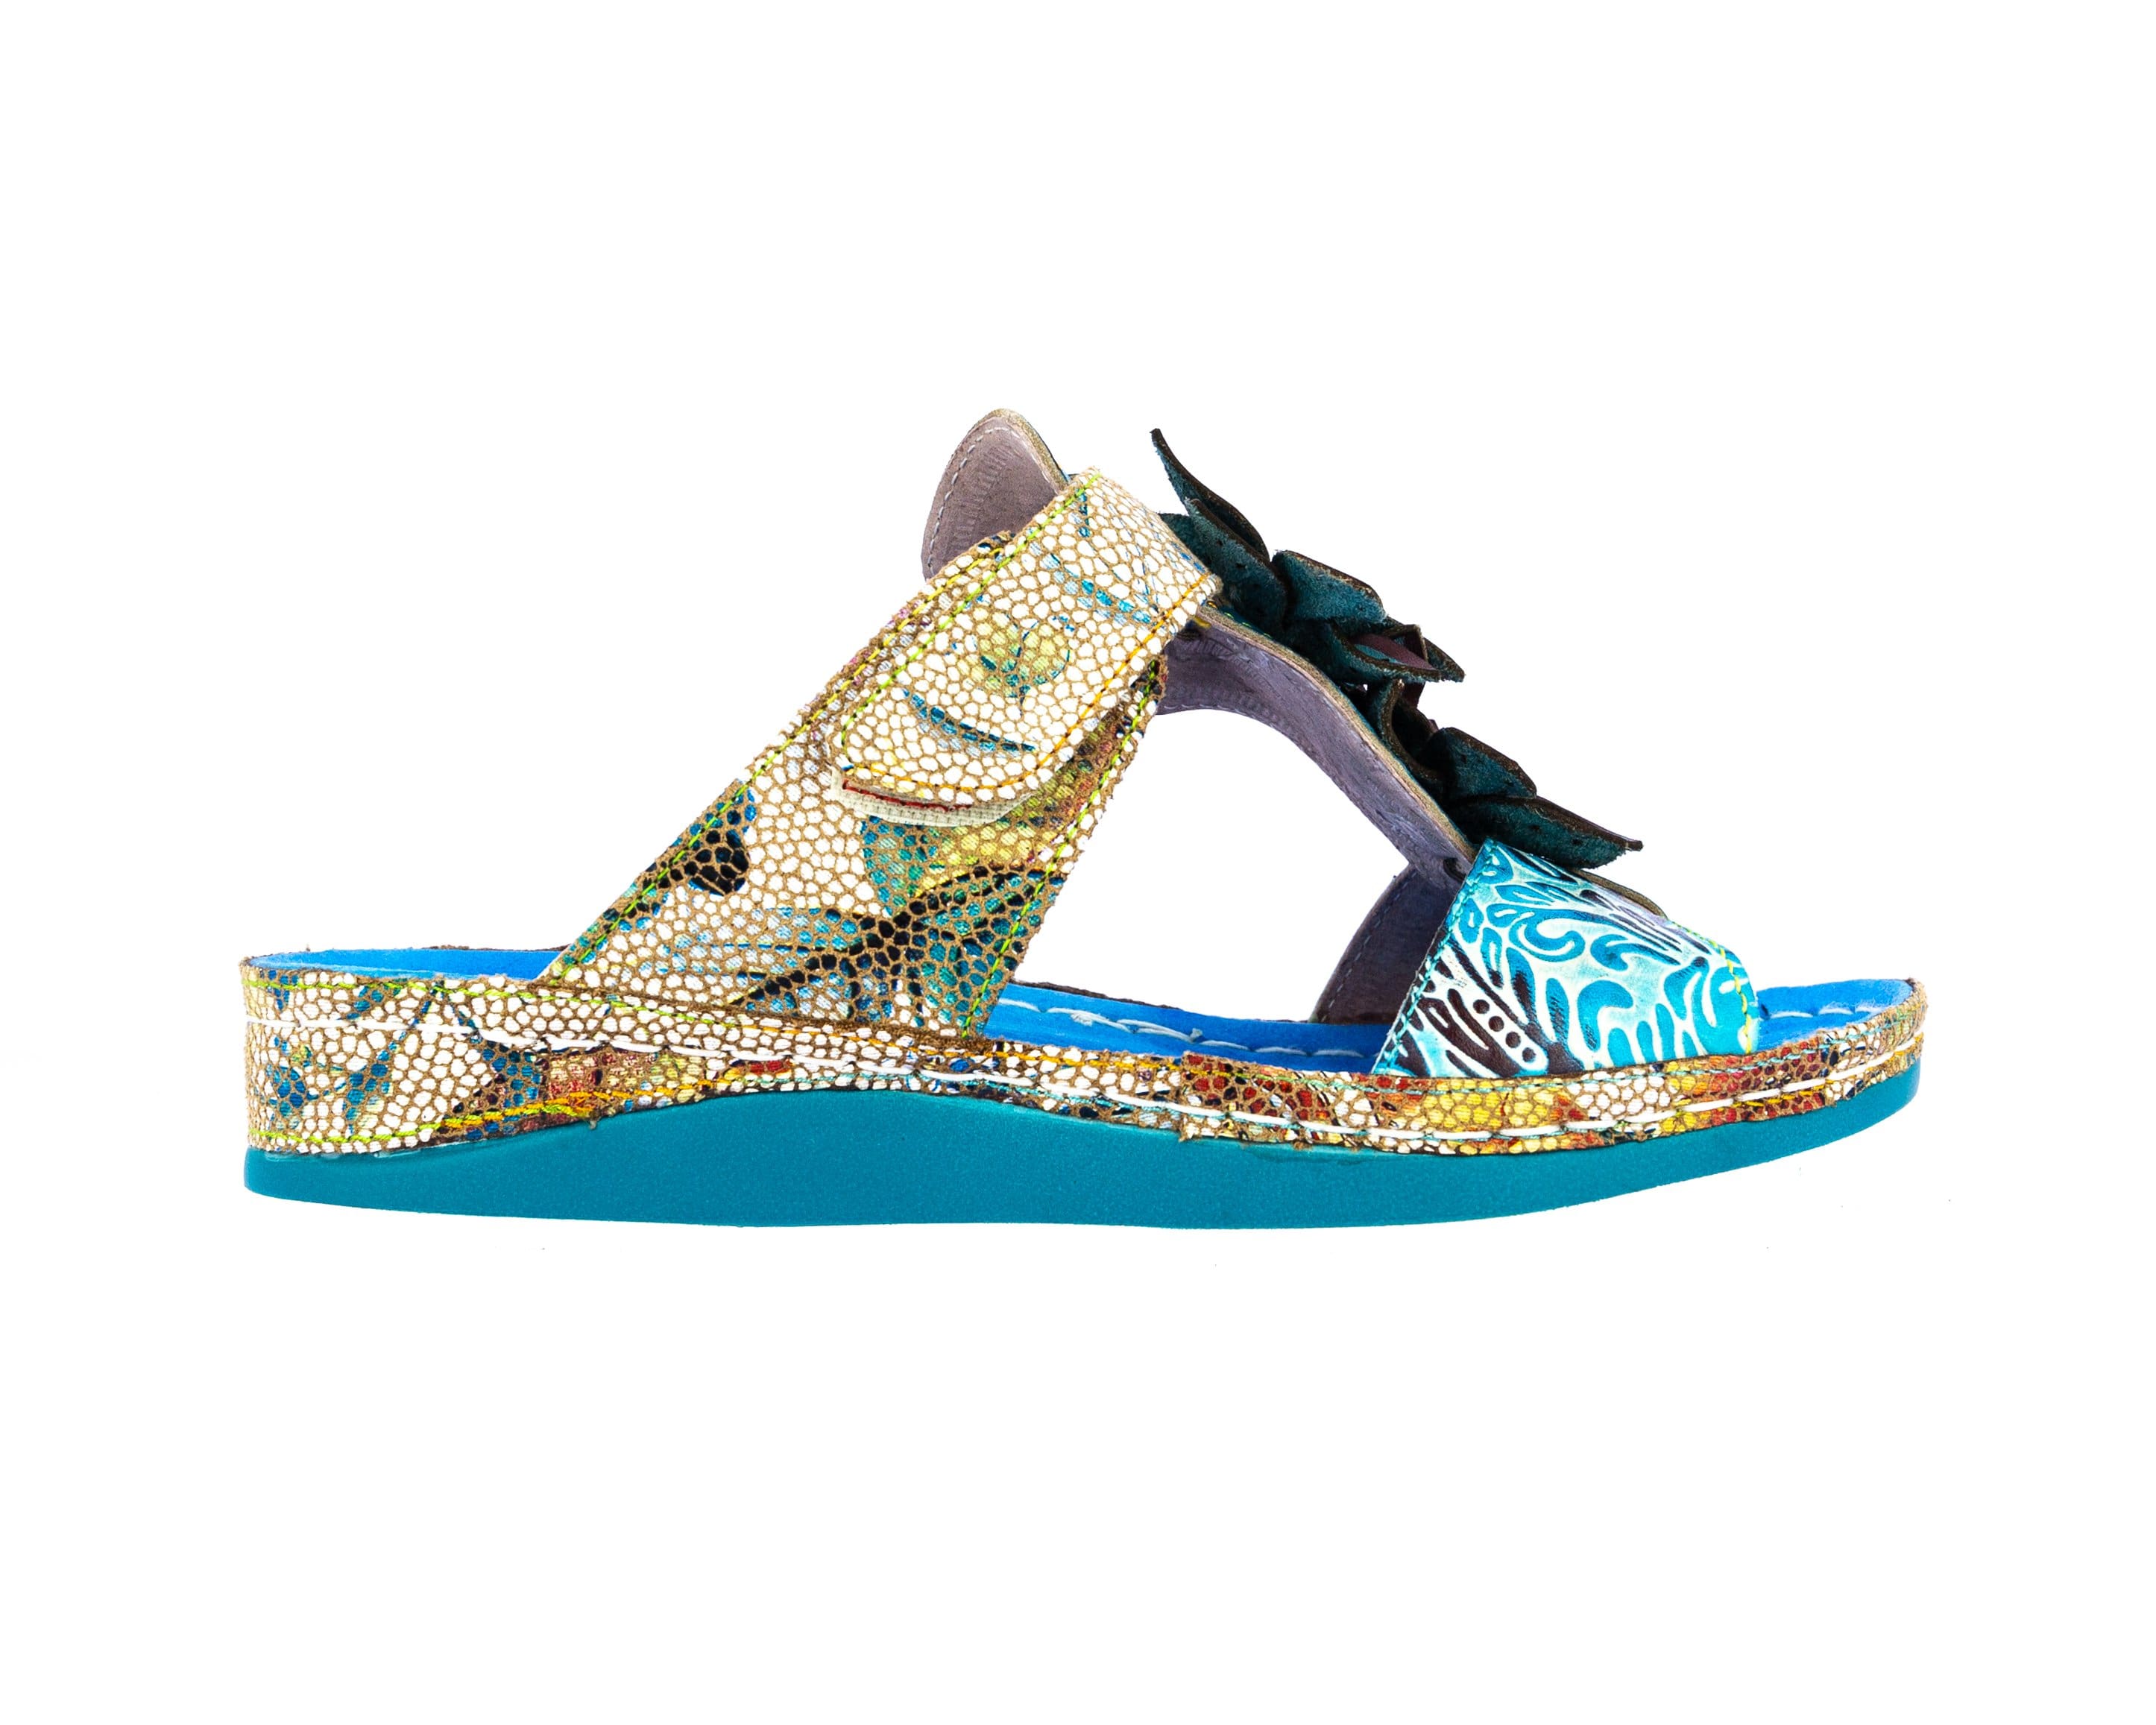 Schuhe BRCUELO 83 - 35 / TURQUOISE - Mulle